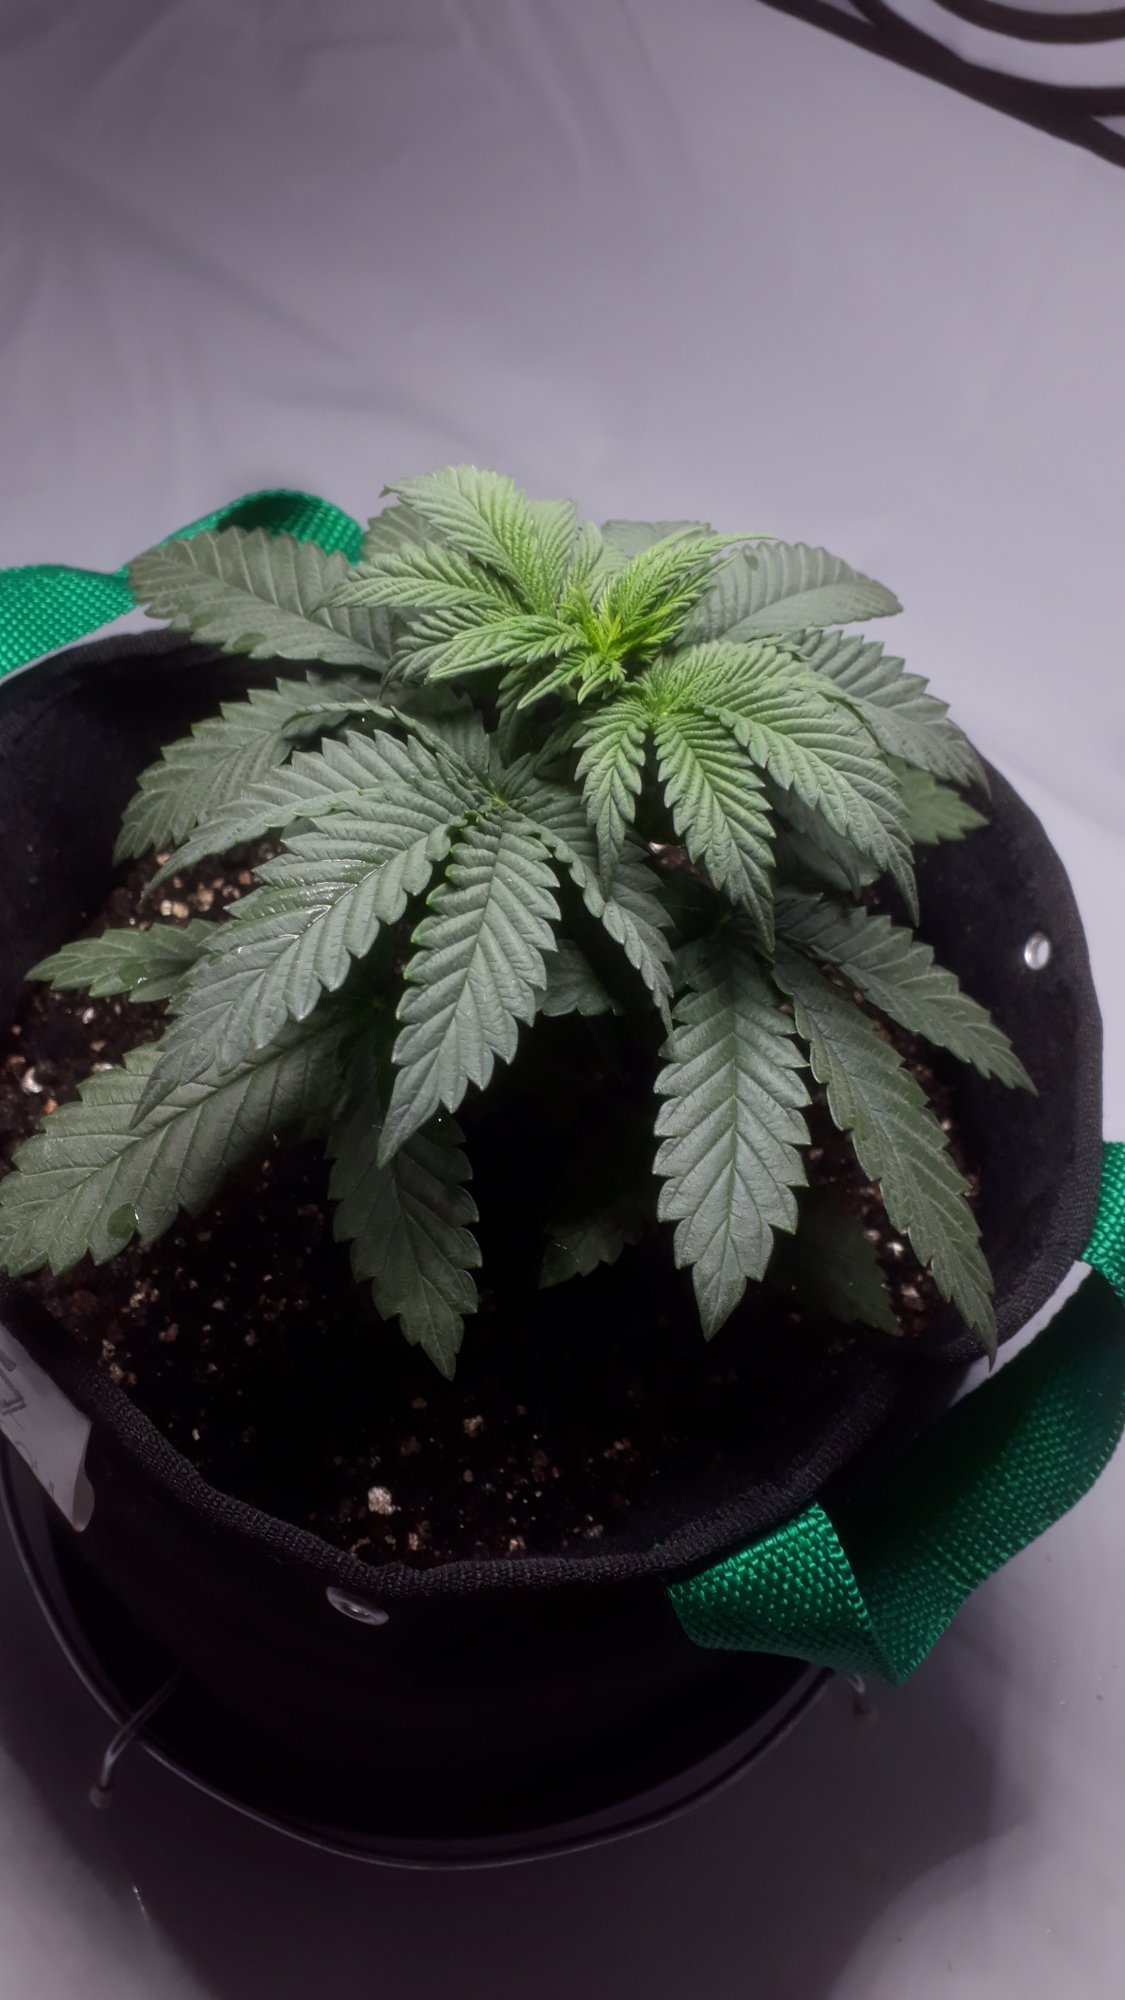 Help 1st time grower 1 month old plant small 5